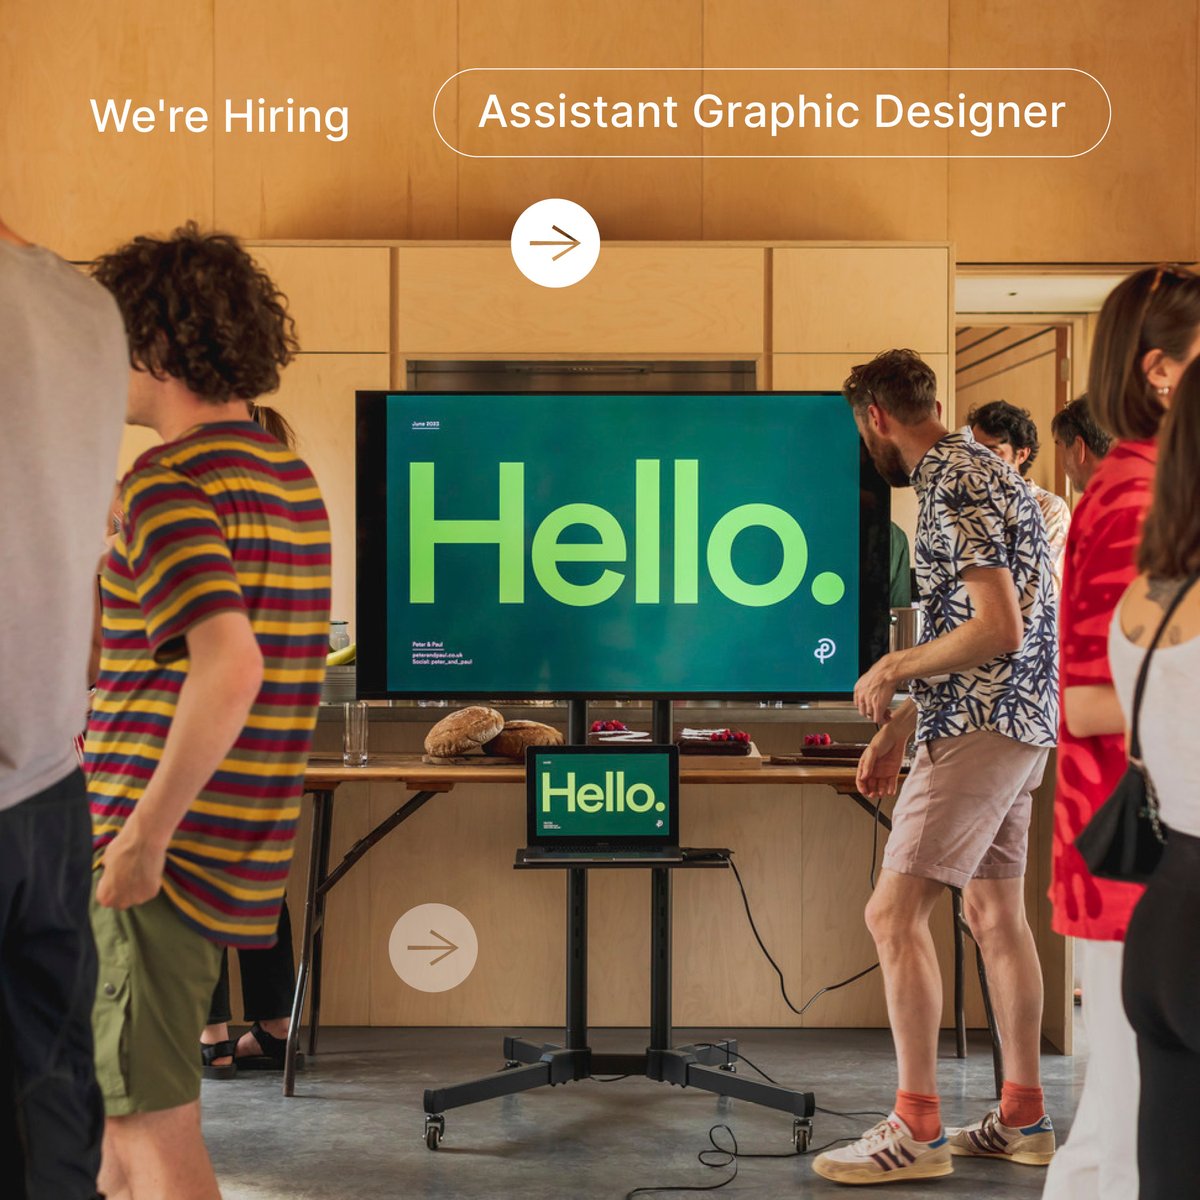 We're searching for an Artworker / Assistant Graphic Designer. If you are looking to be creative for positive purpose, this opportunity will be of interest to you. Application deadline 21 April planit-ie.com/our-team/artwo…